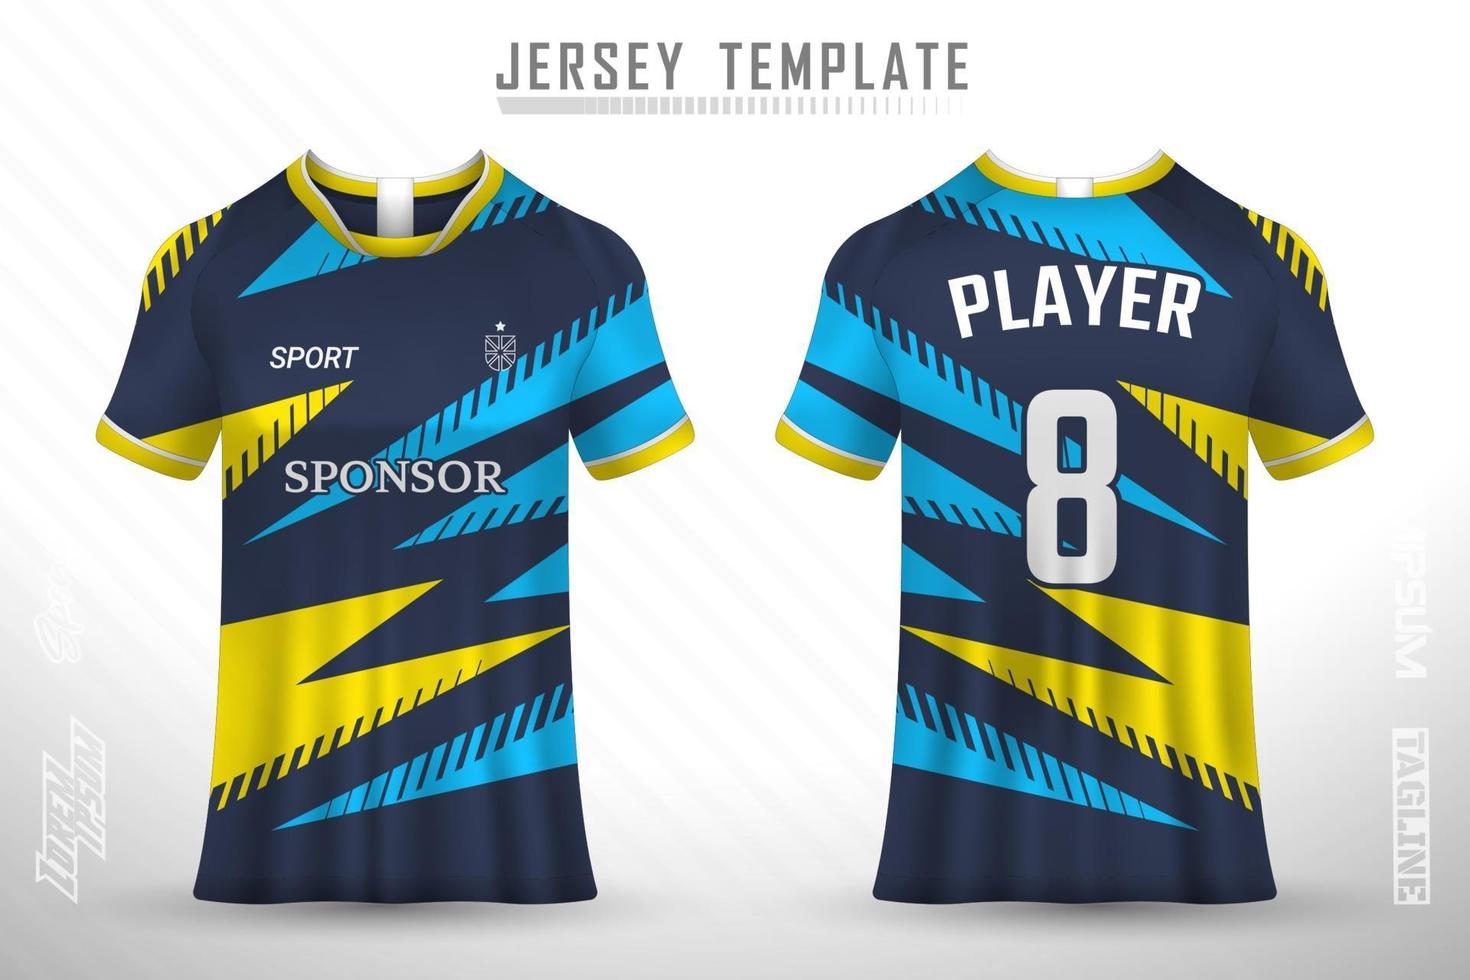 Sports jersey and t-shirt template sports jersey design vector mockup.